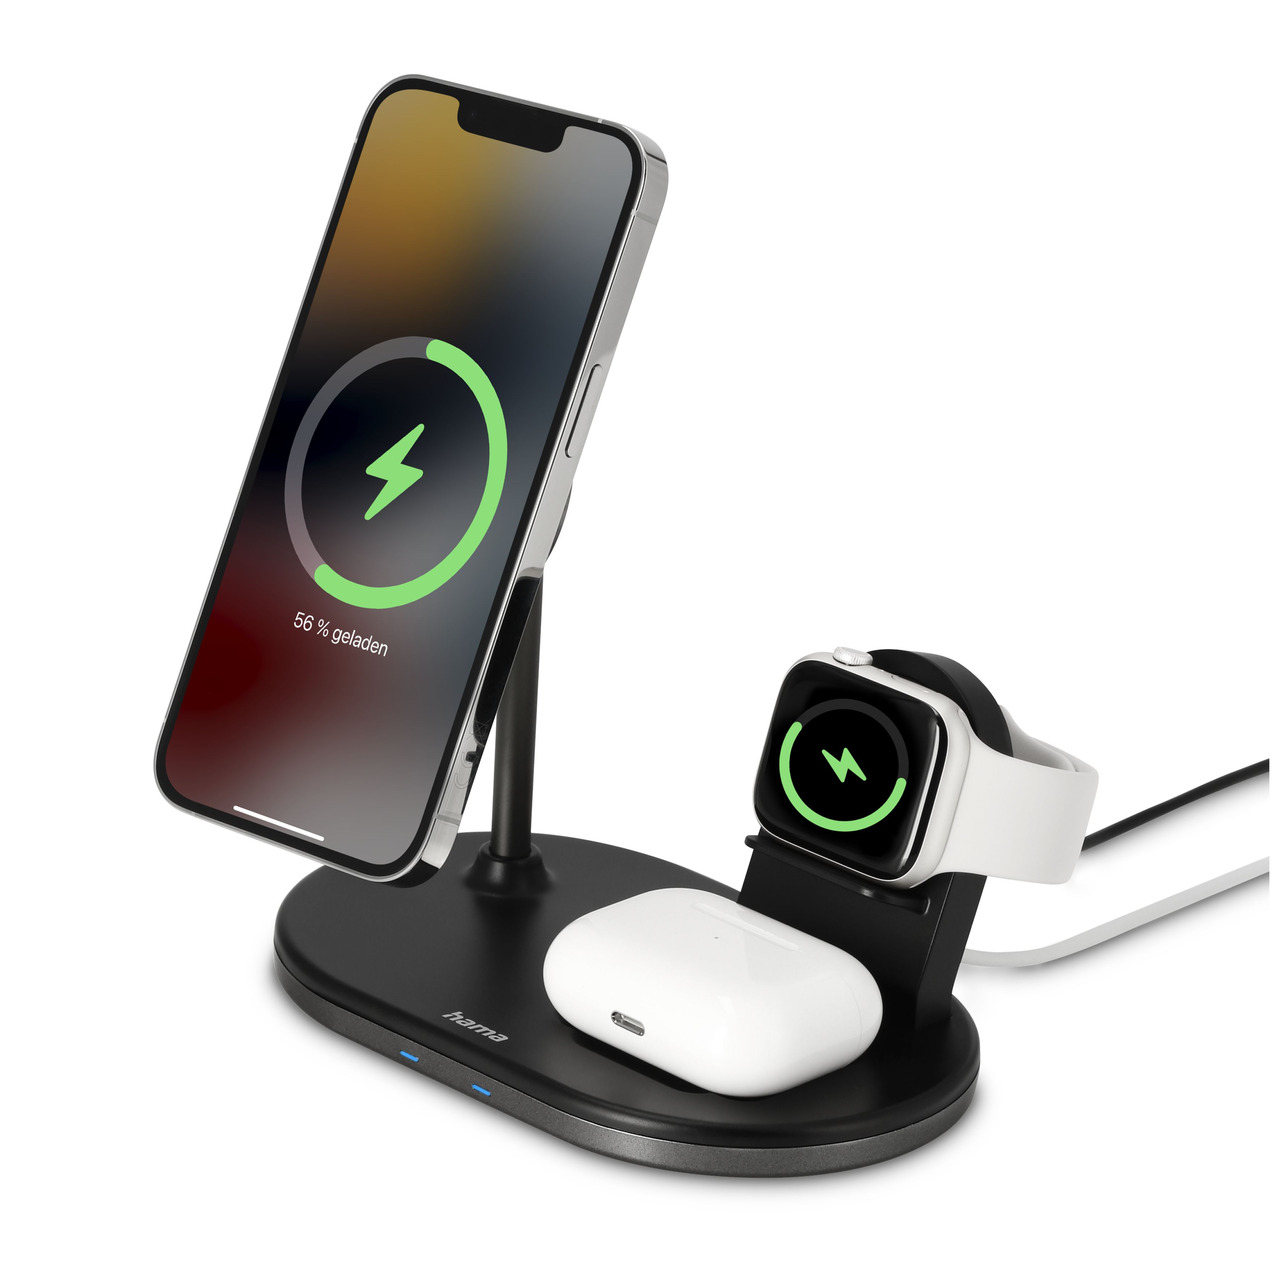 Hama 3-in-1 Induktions-Ladeger鋞 MagCharge Multi f黵 iPhone- AirPods und Apple Watch